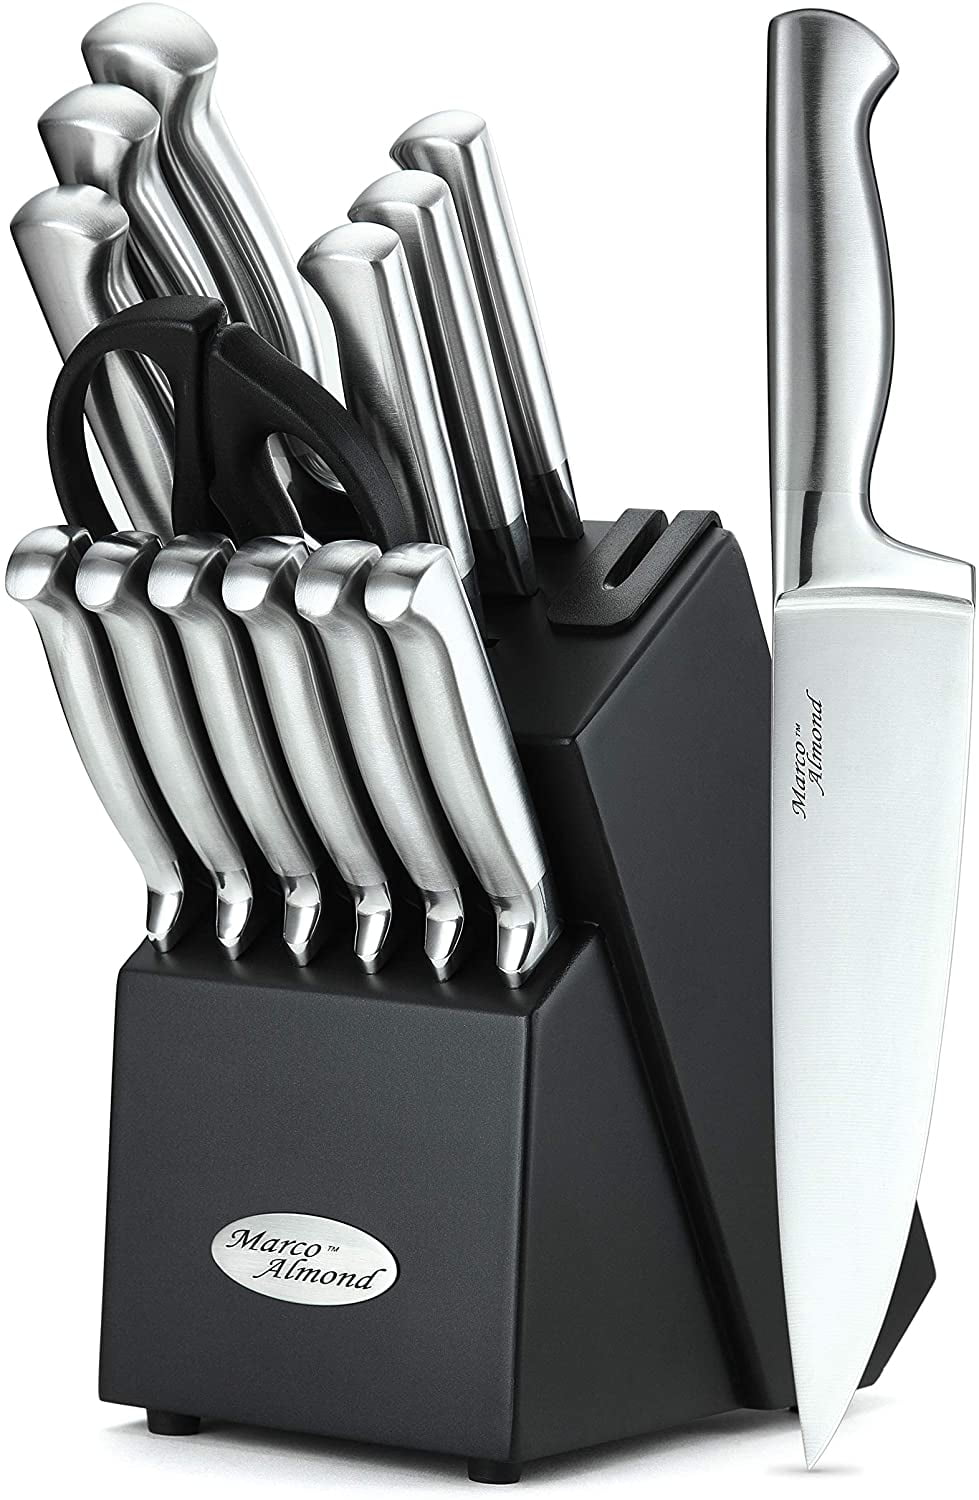 Marco Almond KYA28 14-Piece Stainless Steel Cutlery Kitchen Knife Set with  Block,Built-in Sharpener 